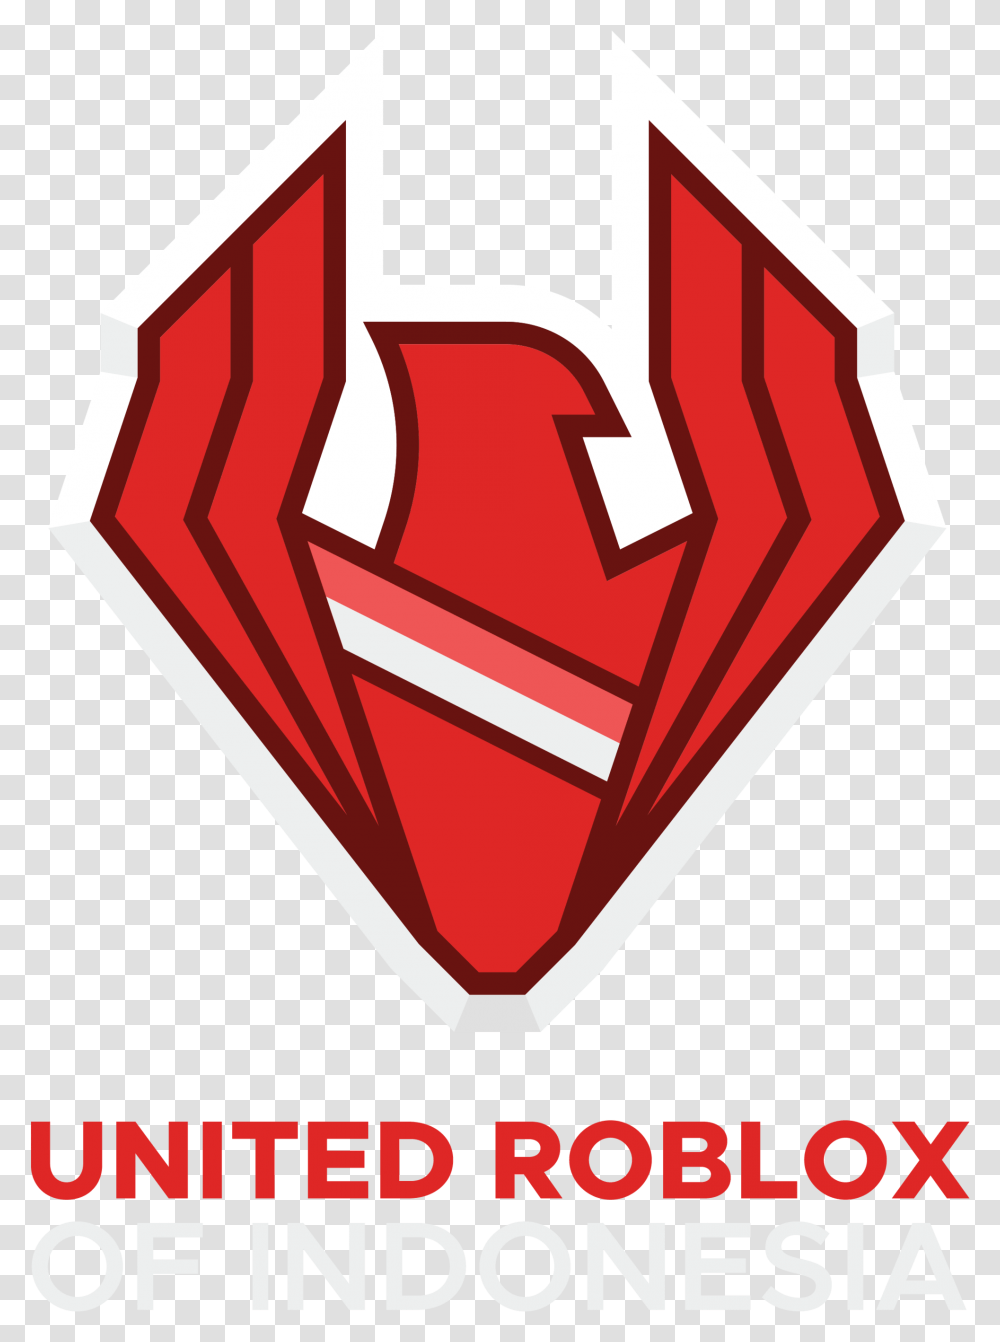 United Roblox Of Indonesia Wiki Fandom United Roblox Of Indonesia, Symbol, Logo, Trademark, Text Transparent Png